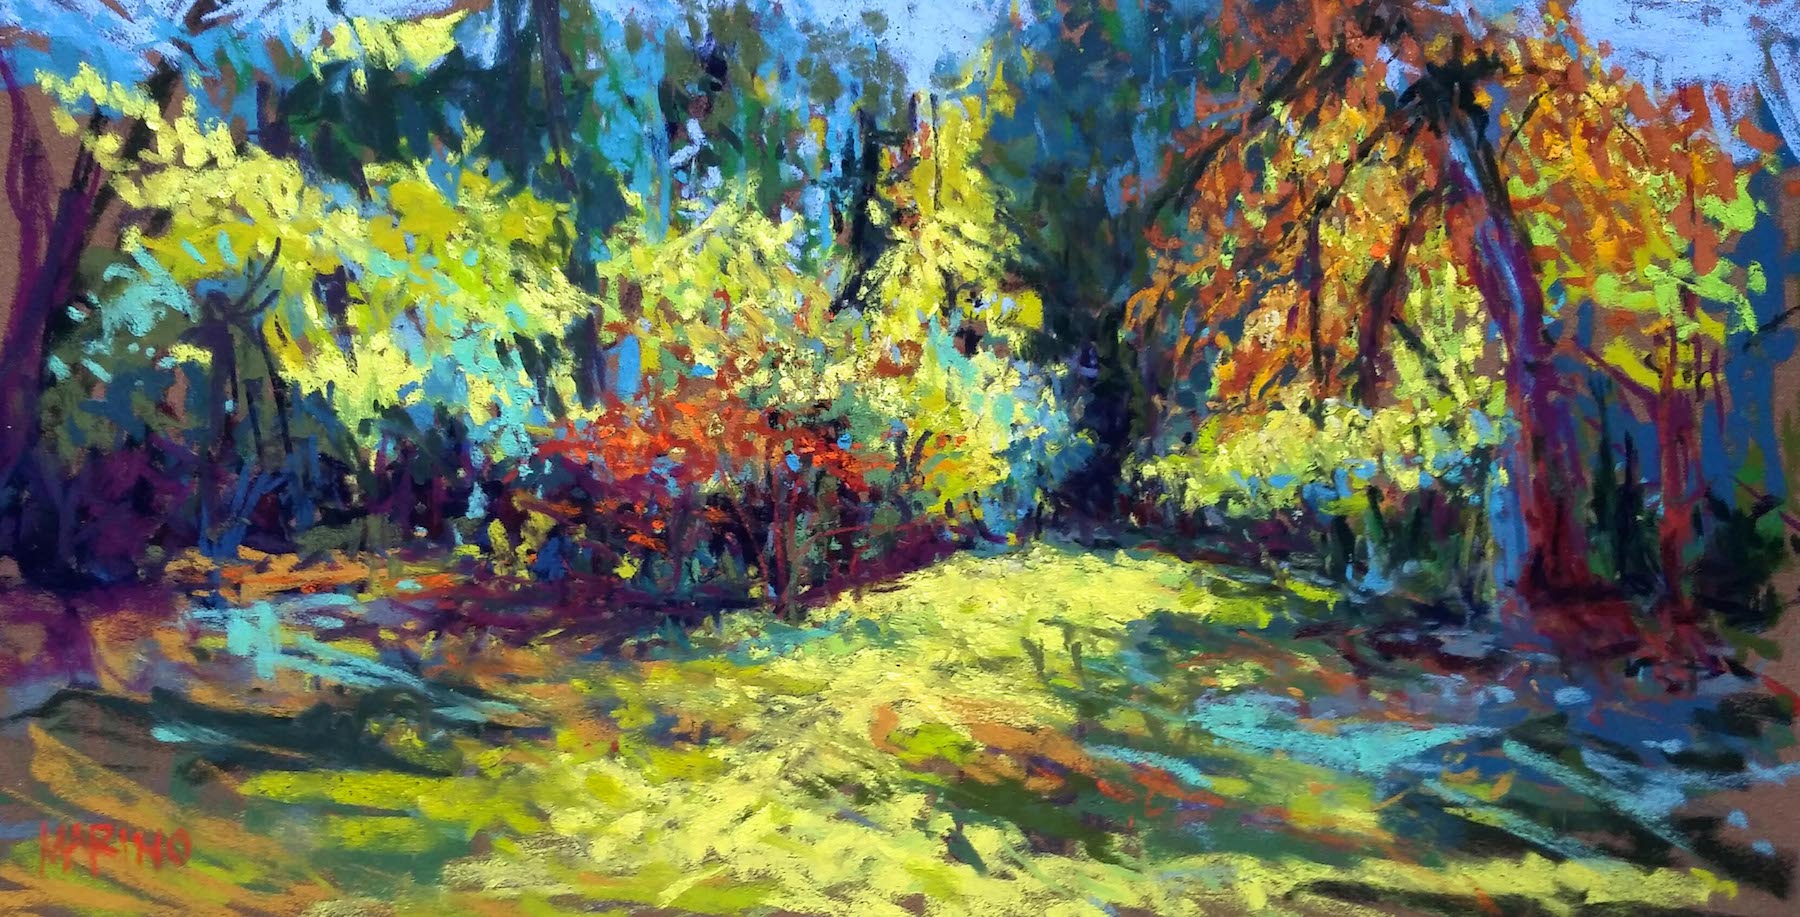 Maria Marino, "Autumnal Light," pastel on Sennelier LaCarte paper, 9 x 16 in. Sold. Plein air painting completed during an event. The image is a hedgerow of trees located at Liriodendron Mansion.